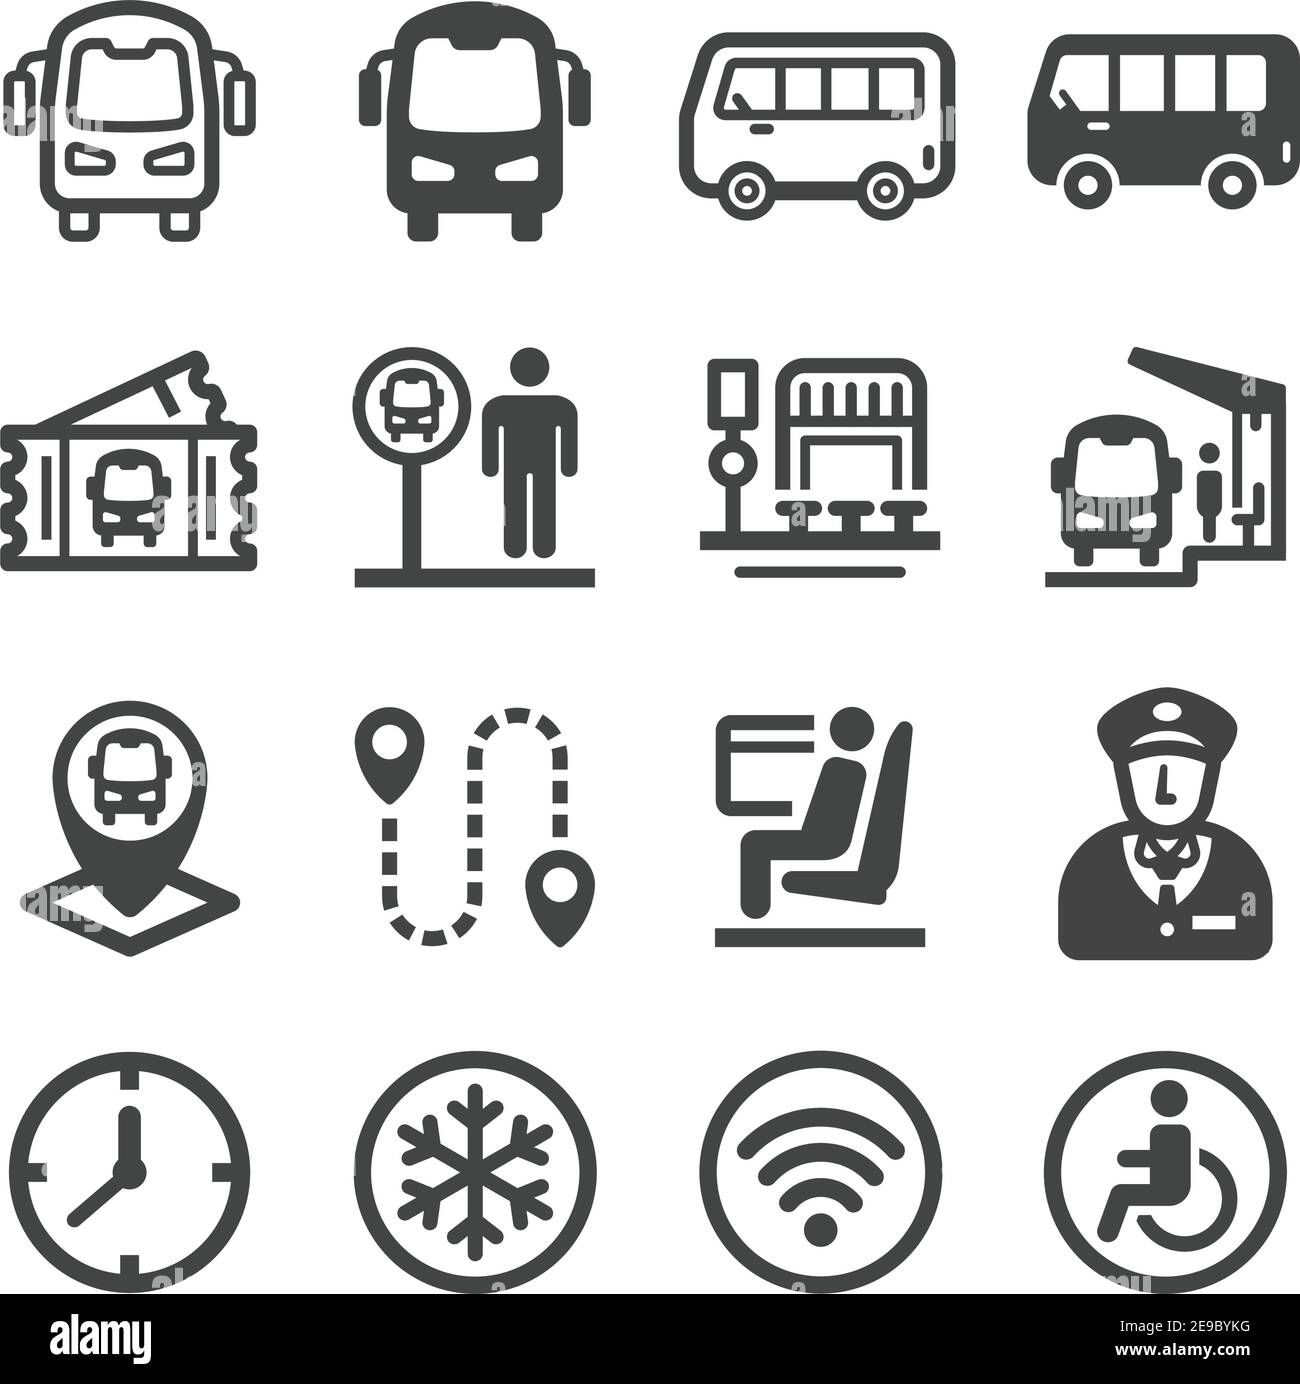 bus icon set,vector and illustration Stock Vector